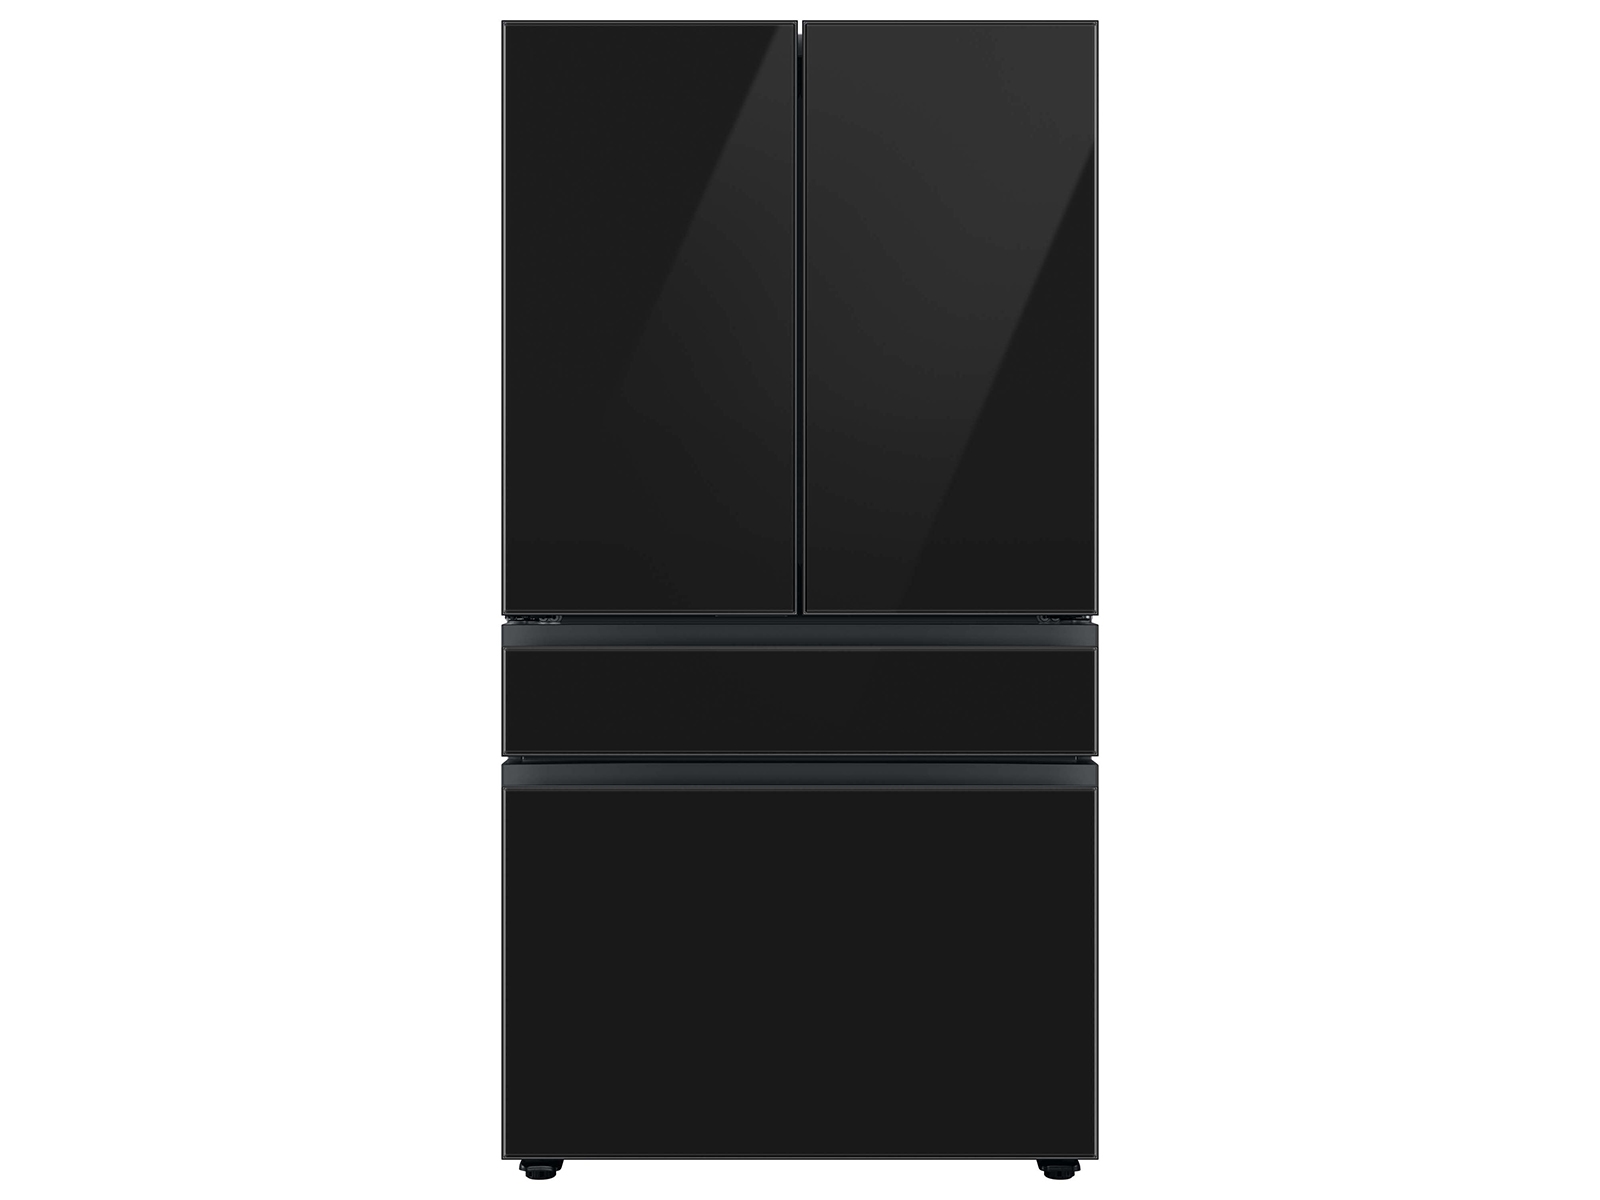 Samsung Bespoke 4-Door French Door Refrigerator in White Glass (23 cu. ft.) with AutoFill Water Pitcher and Customizable Door Panel Colors in Charcoal Glass